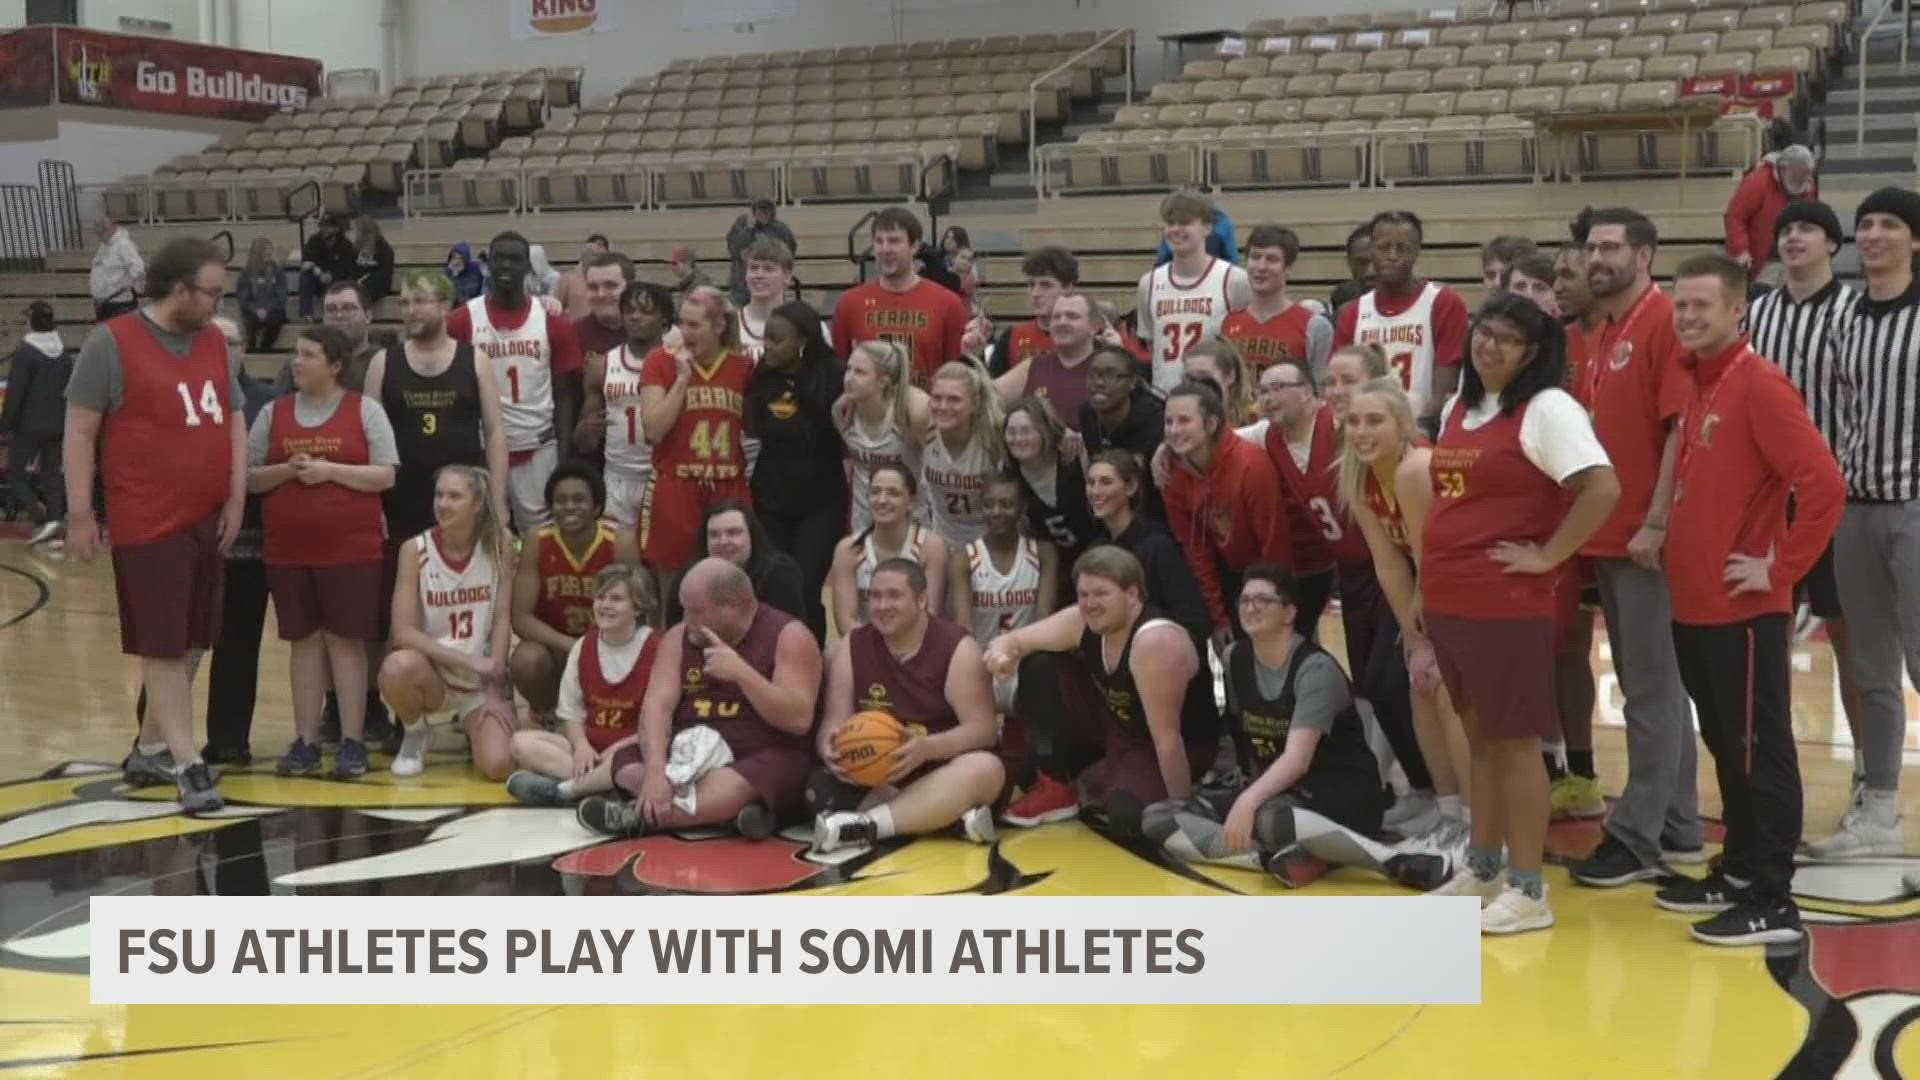 Most Special Olympics athletes will tell you any game is a fun time. But tonight's meant a little more, getting to share the court some of their favorite athletes.